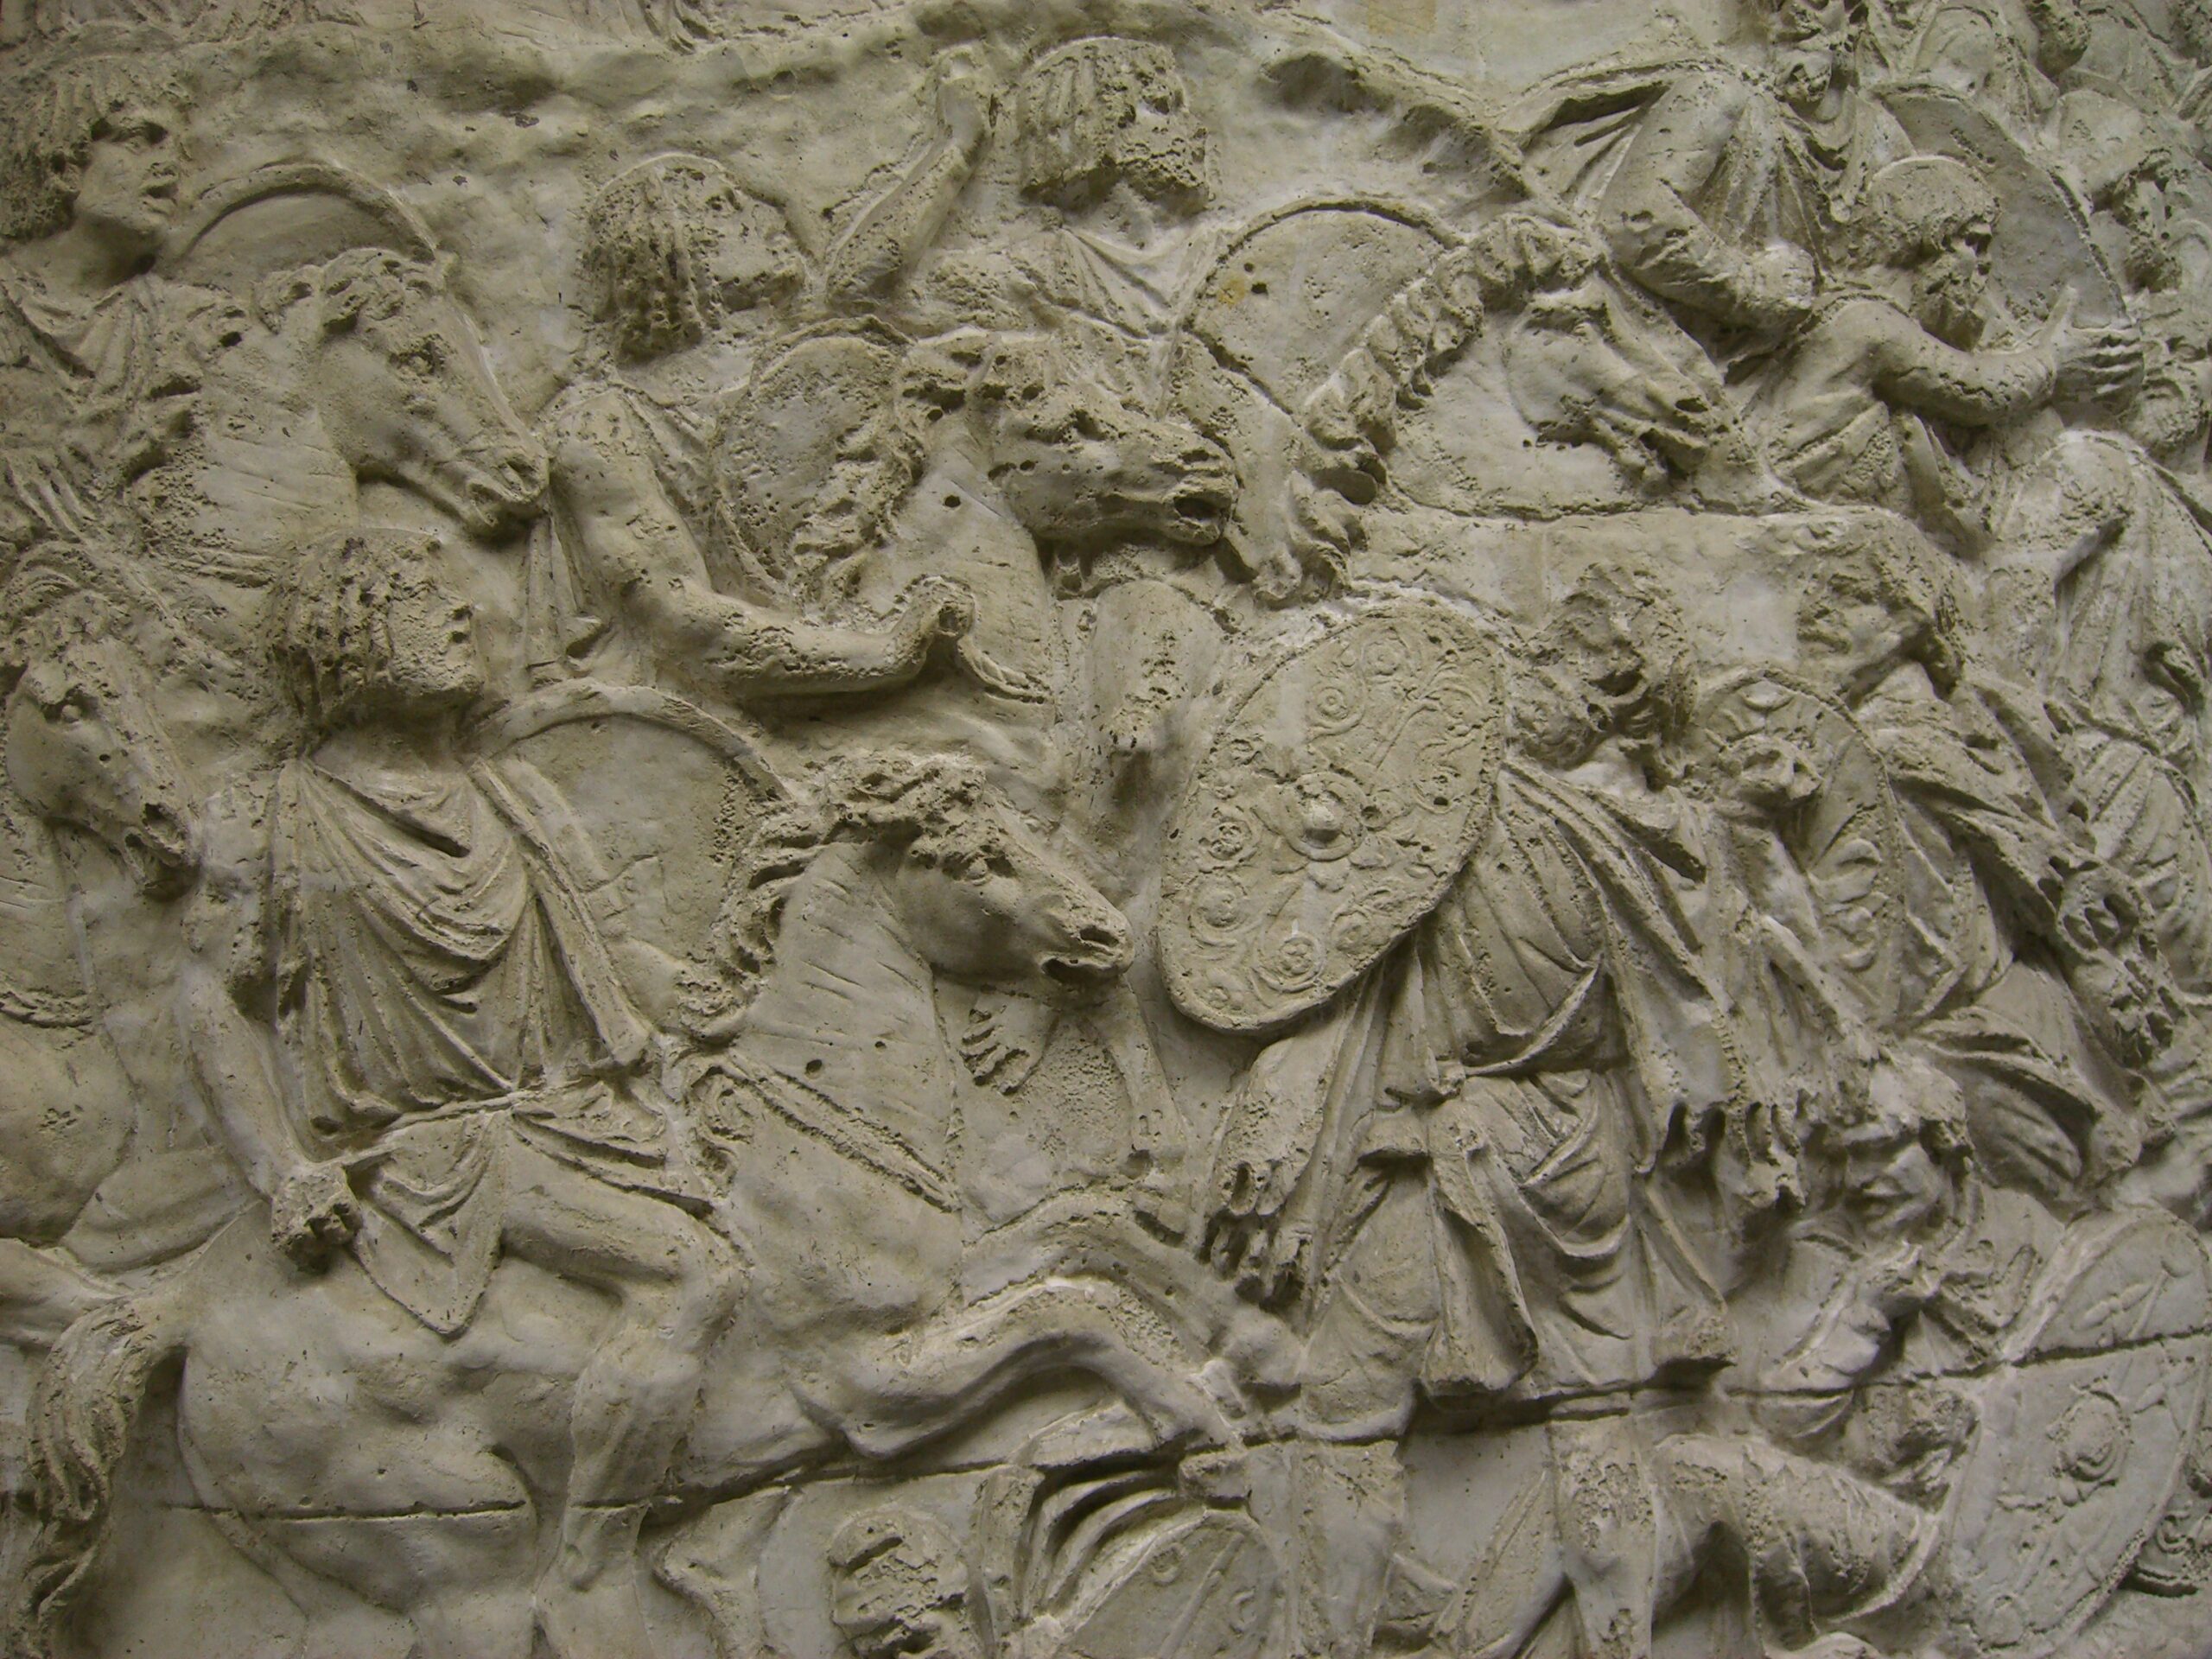 Scene 64/LXIV: cavalrymen from Roman Morocco (Mauretania) confront Dacian warriors on foot (detail), Column of Trajan, Forum of Trajan, Rome, 106–113 C.E., marble, 38.4 m high (photo from casts 157–158, now in the Museo della Civiltà Romana, Rome; photo: Dr. Kimberly Cassibry, CC BY-NC-SA 4.0)